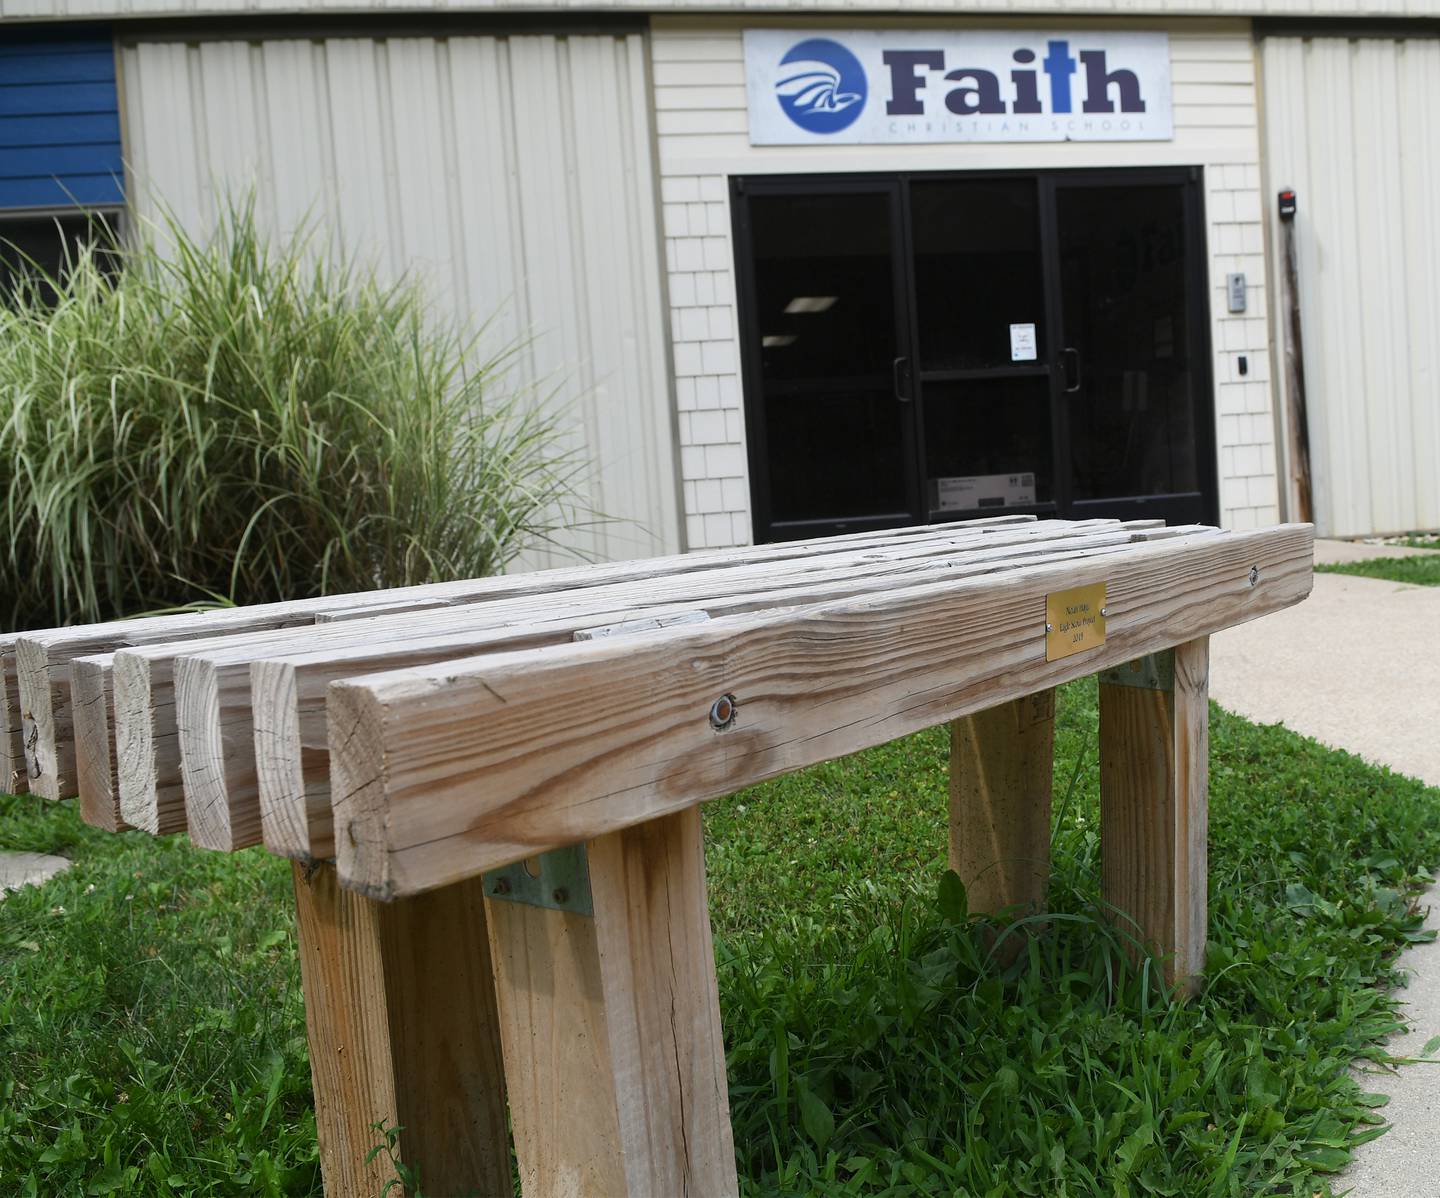 This is one of the two wooden benches Noah Hage made at entrance to Faith Christian School in Grand Detour as his 2019 Eagle Scout Project.